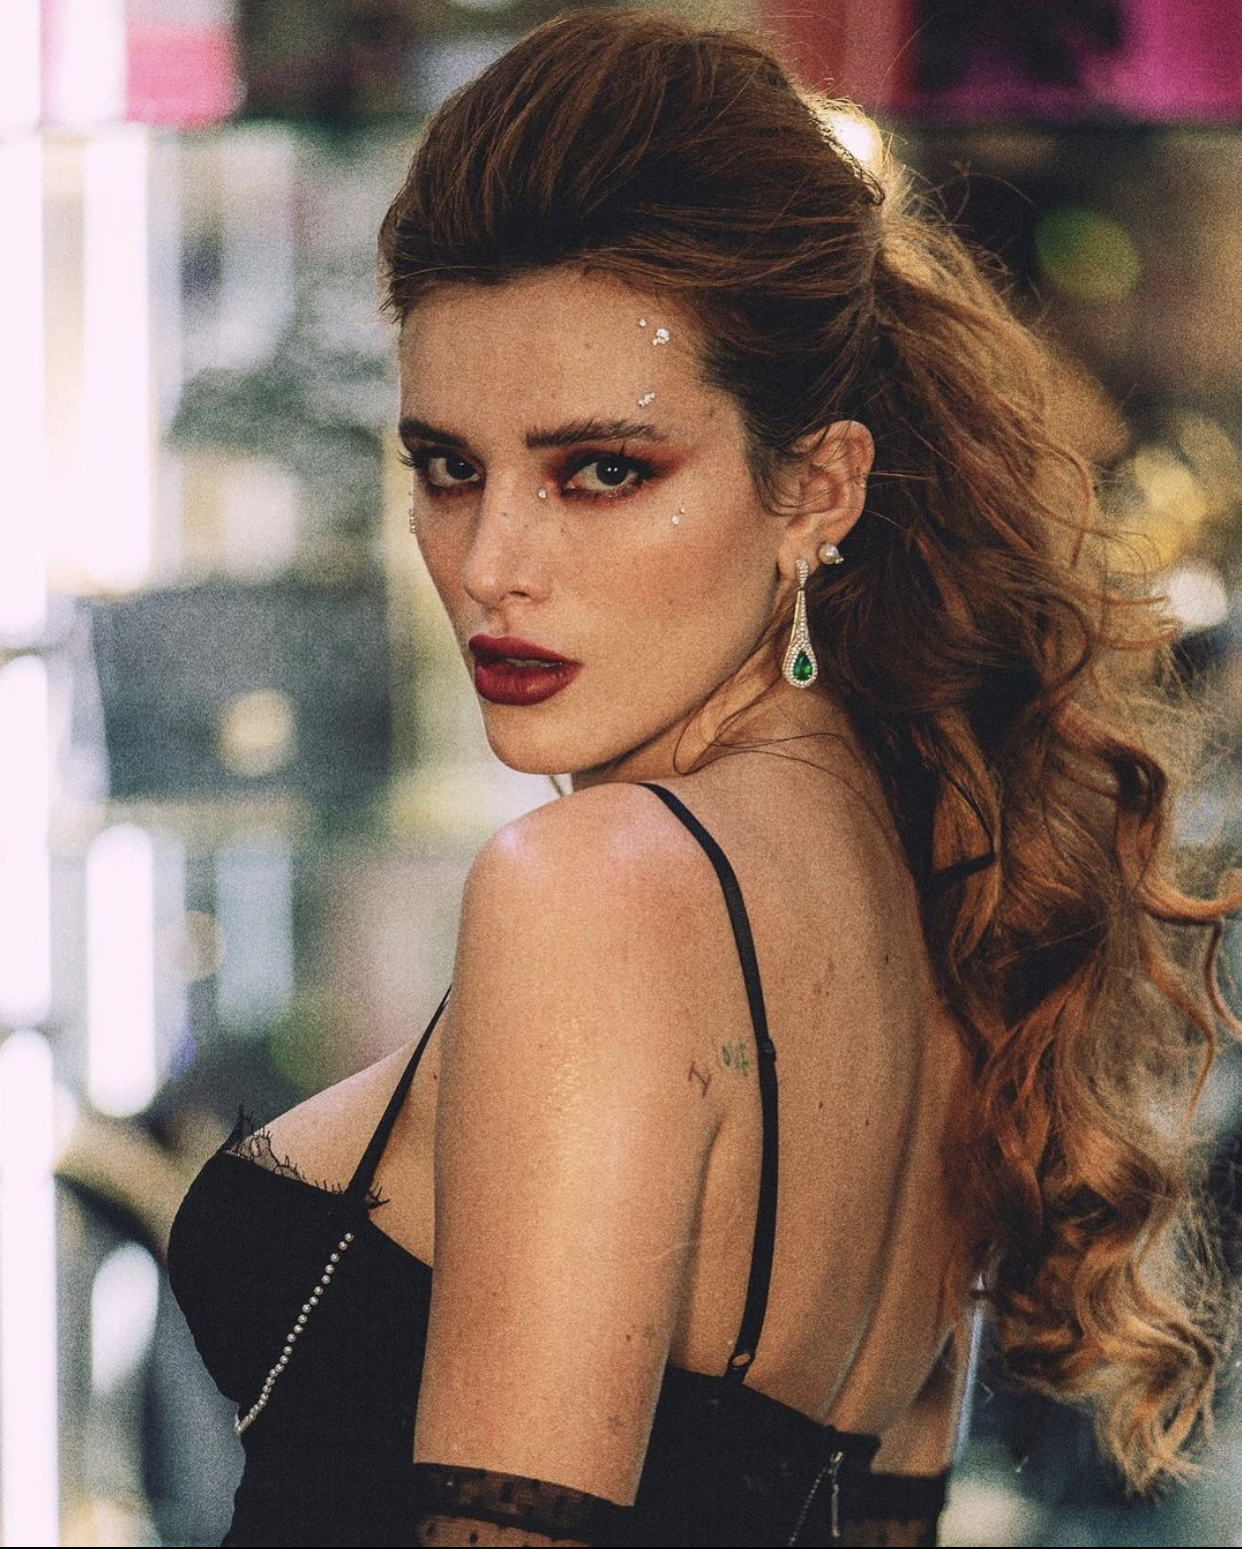 Bella Thorne broke a record on OnlyFans by earning $2 million in a